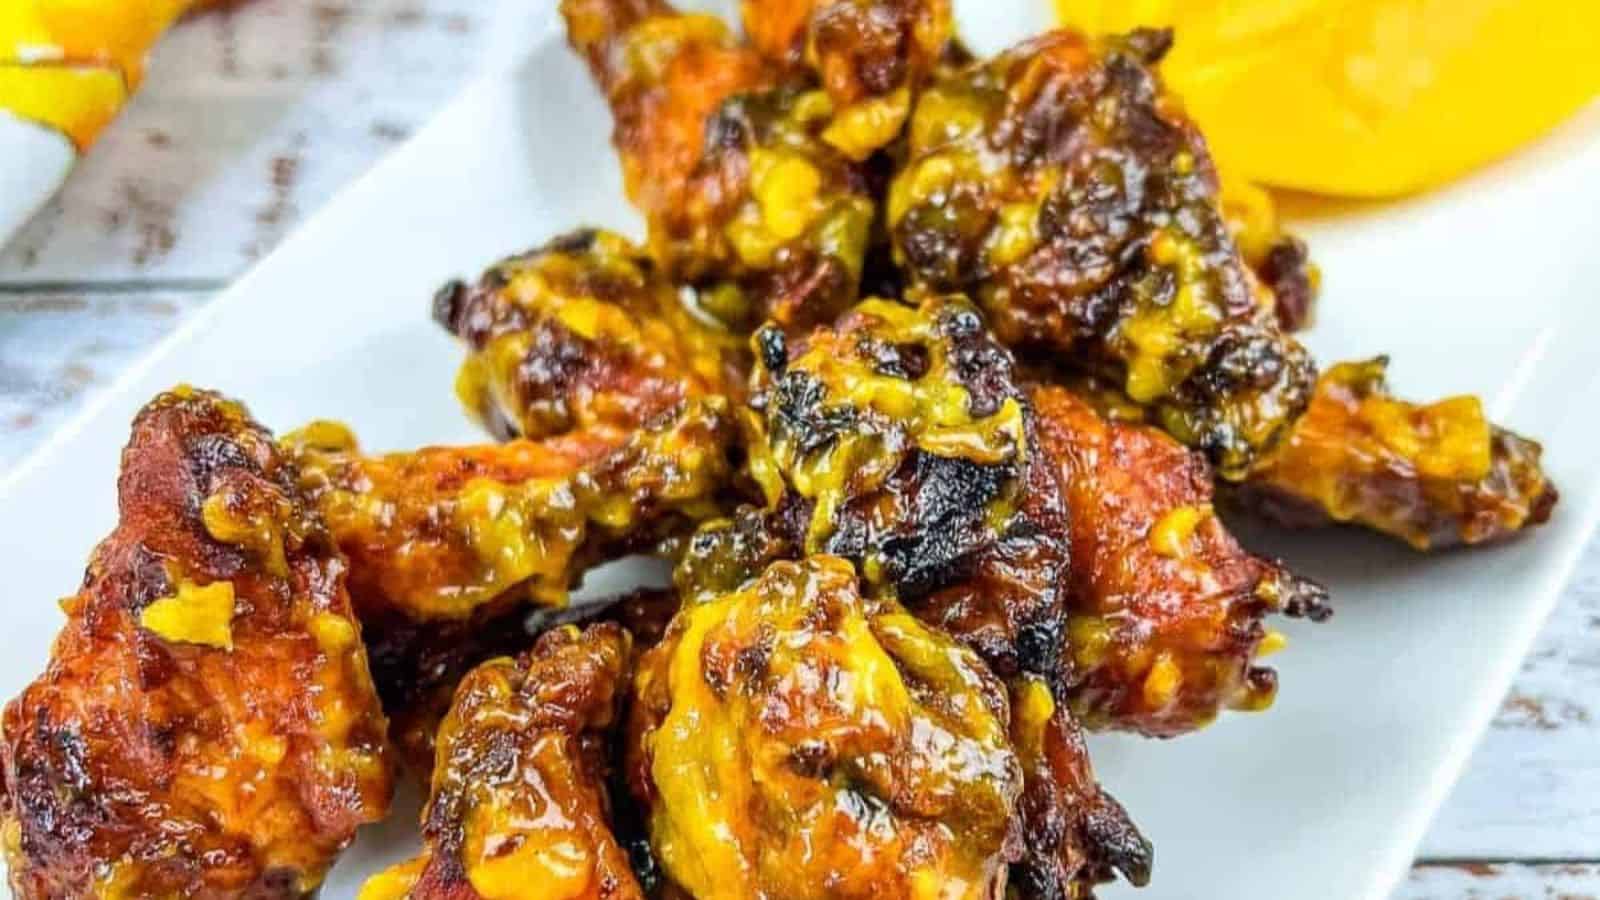 A plate of chicken wings on a white plate with a slice of mango.